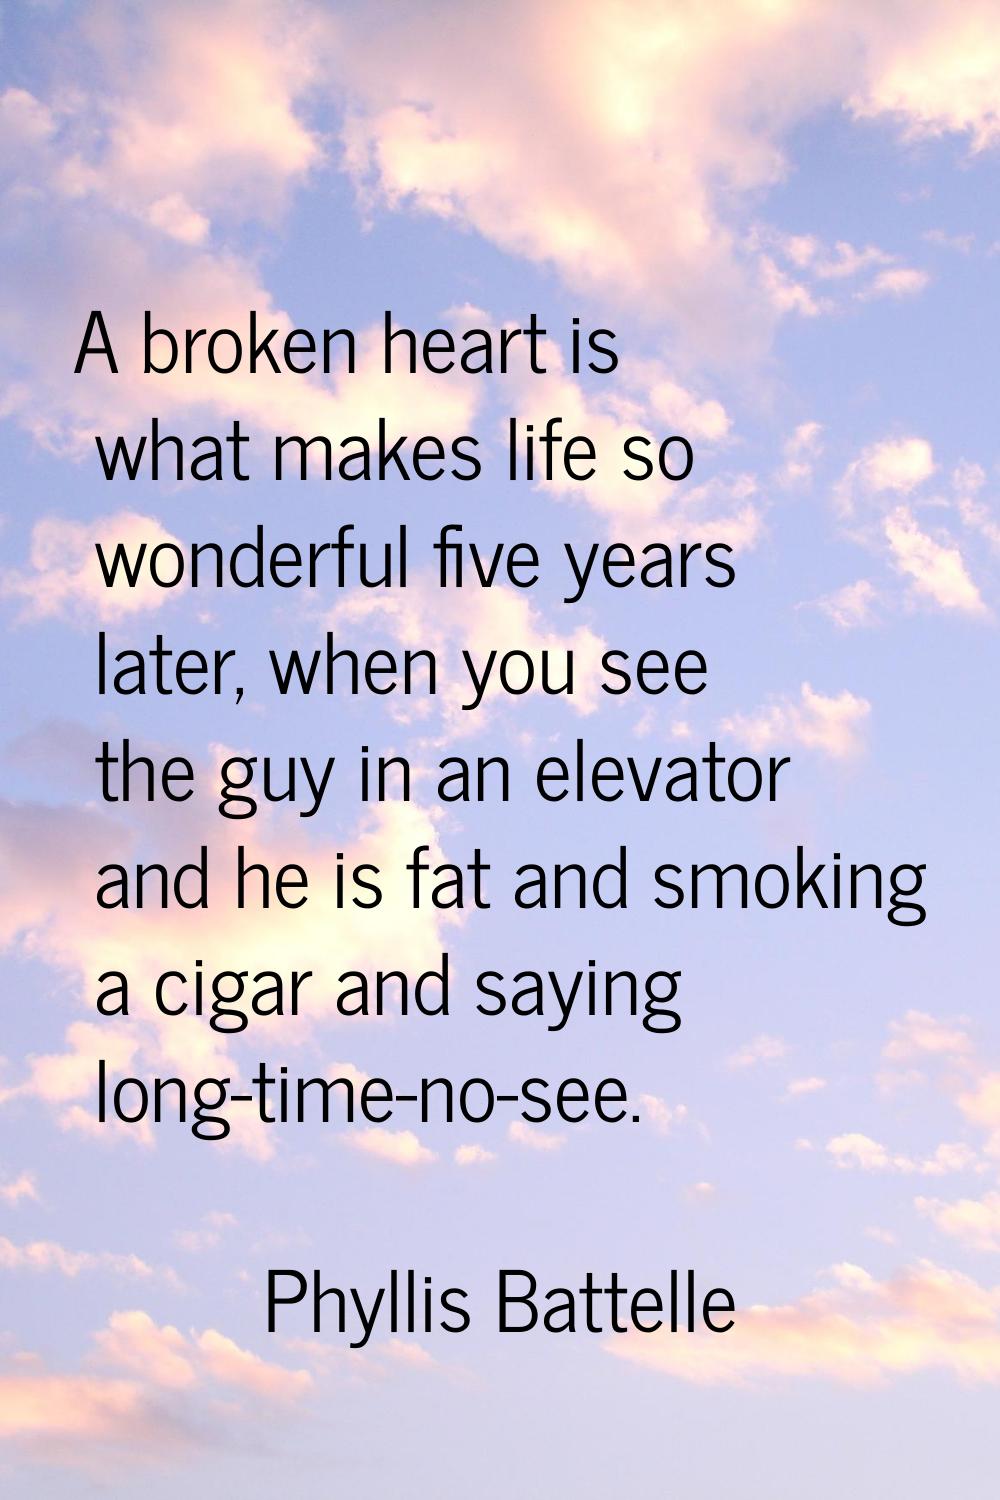 A broken heart is what makes life so wonderful five years later, when you see the guy in an elevato